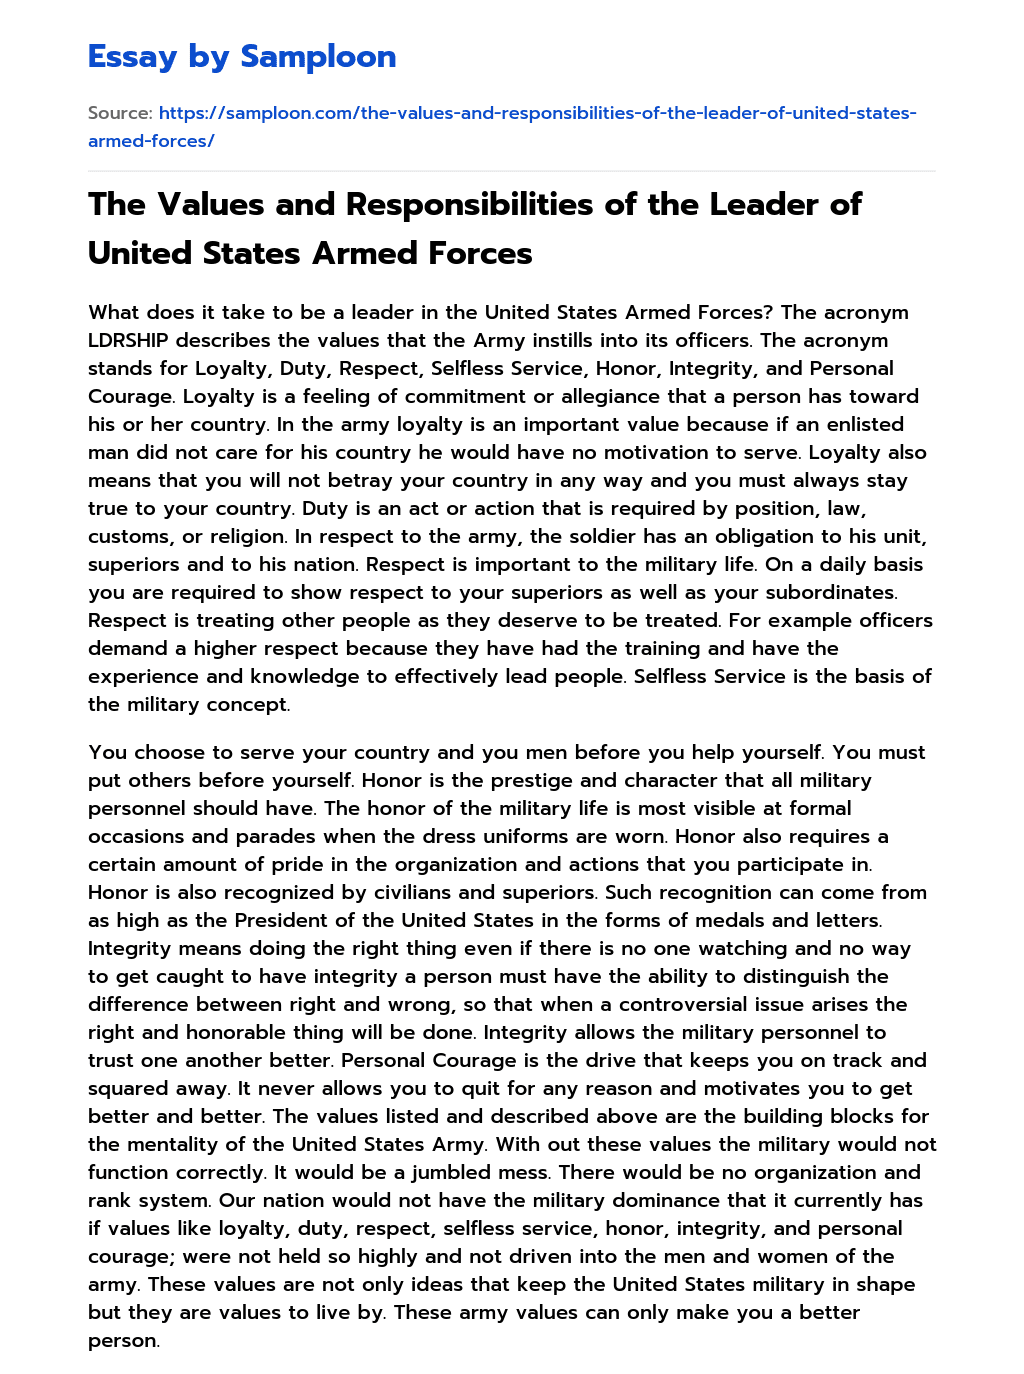 The Values and Responsibilities of the Leader of United States Armed Forces essay